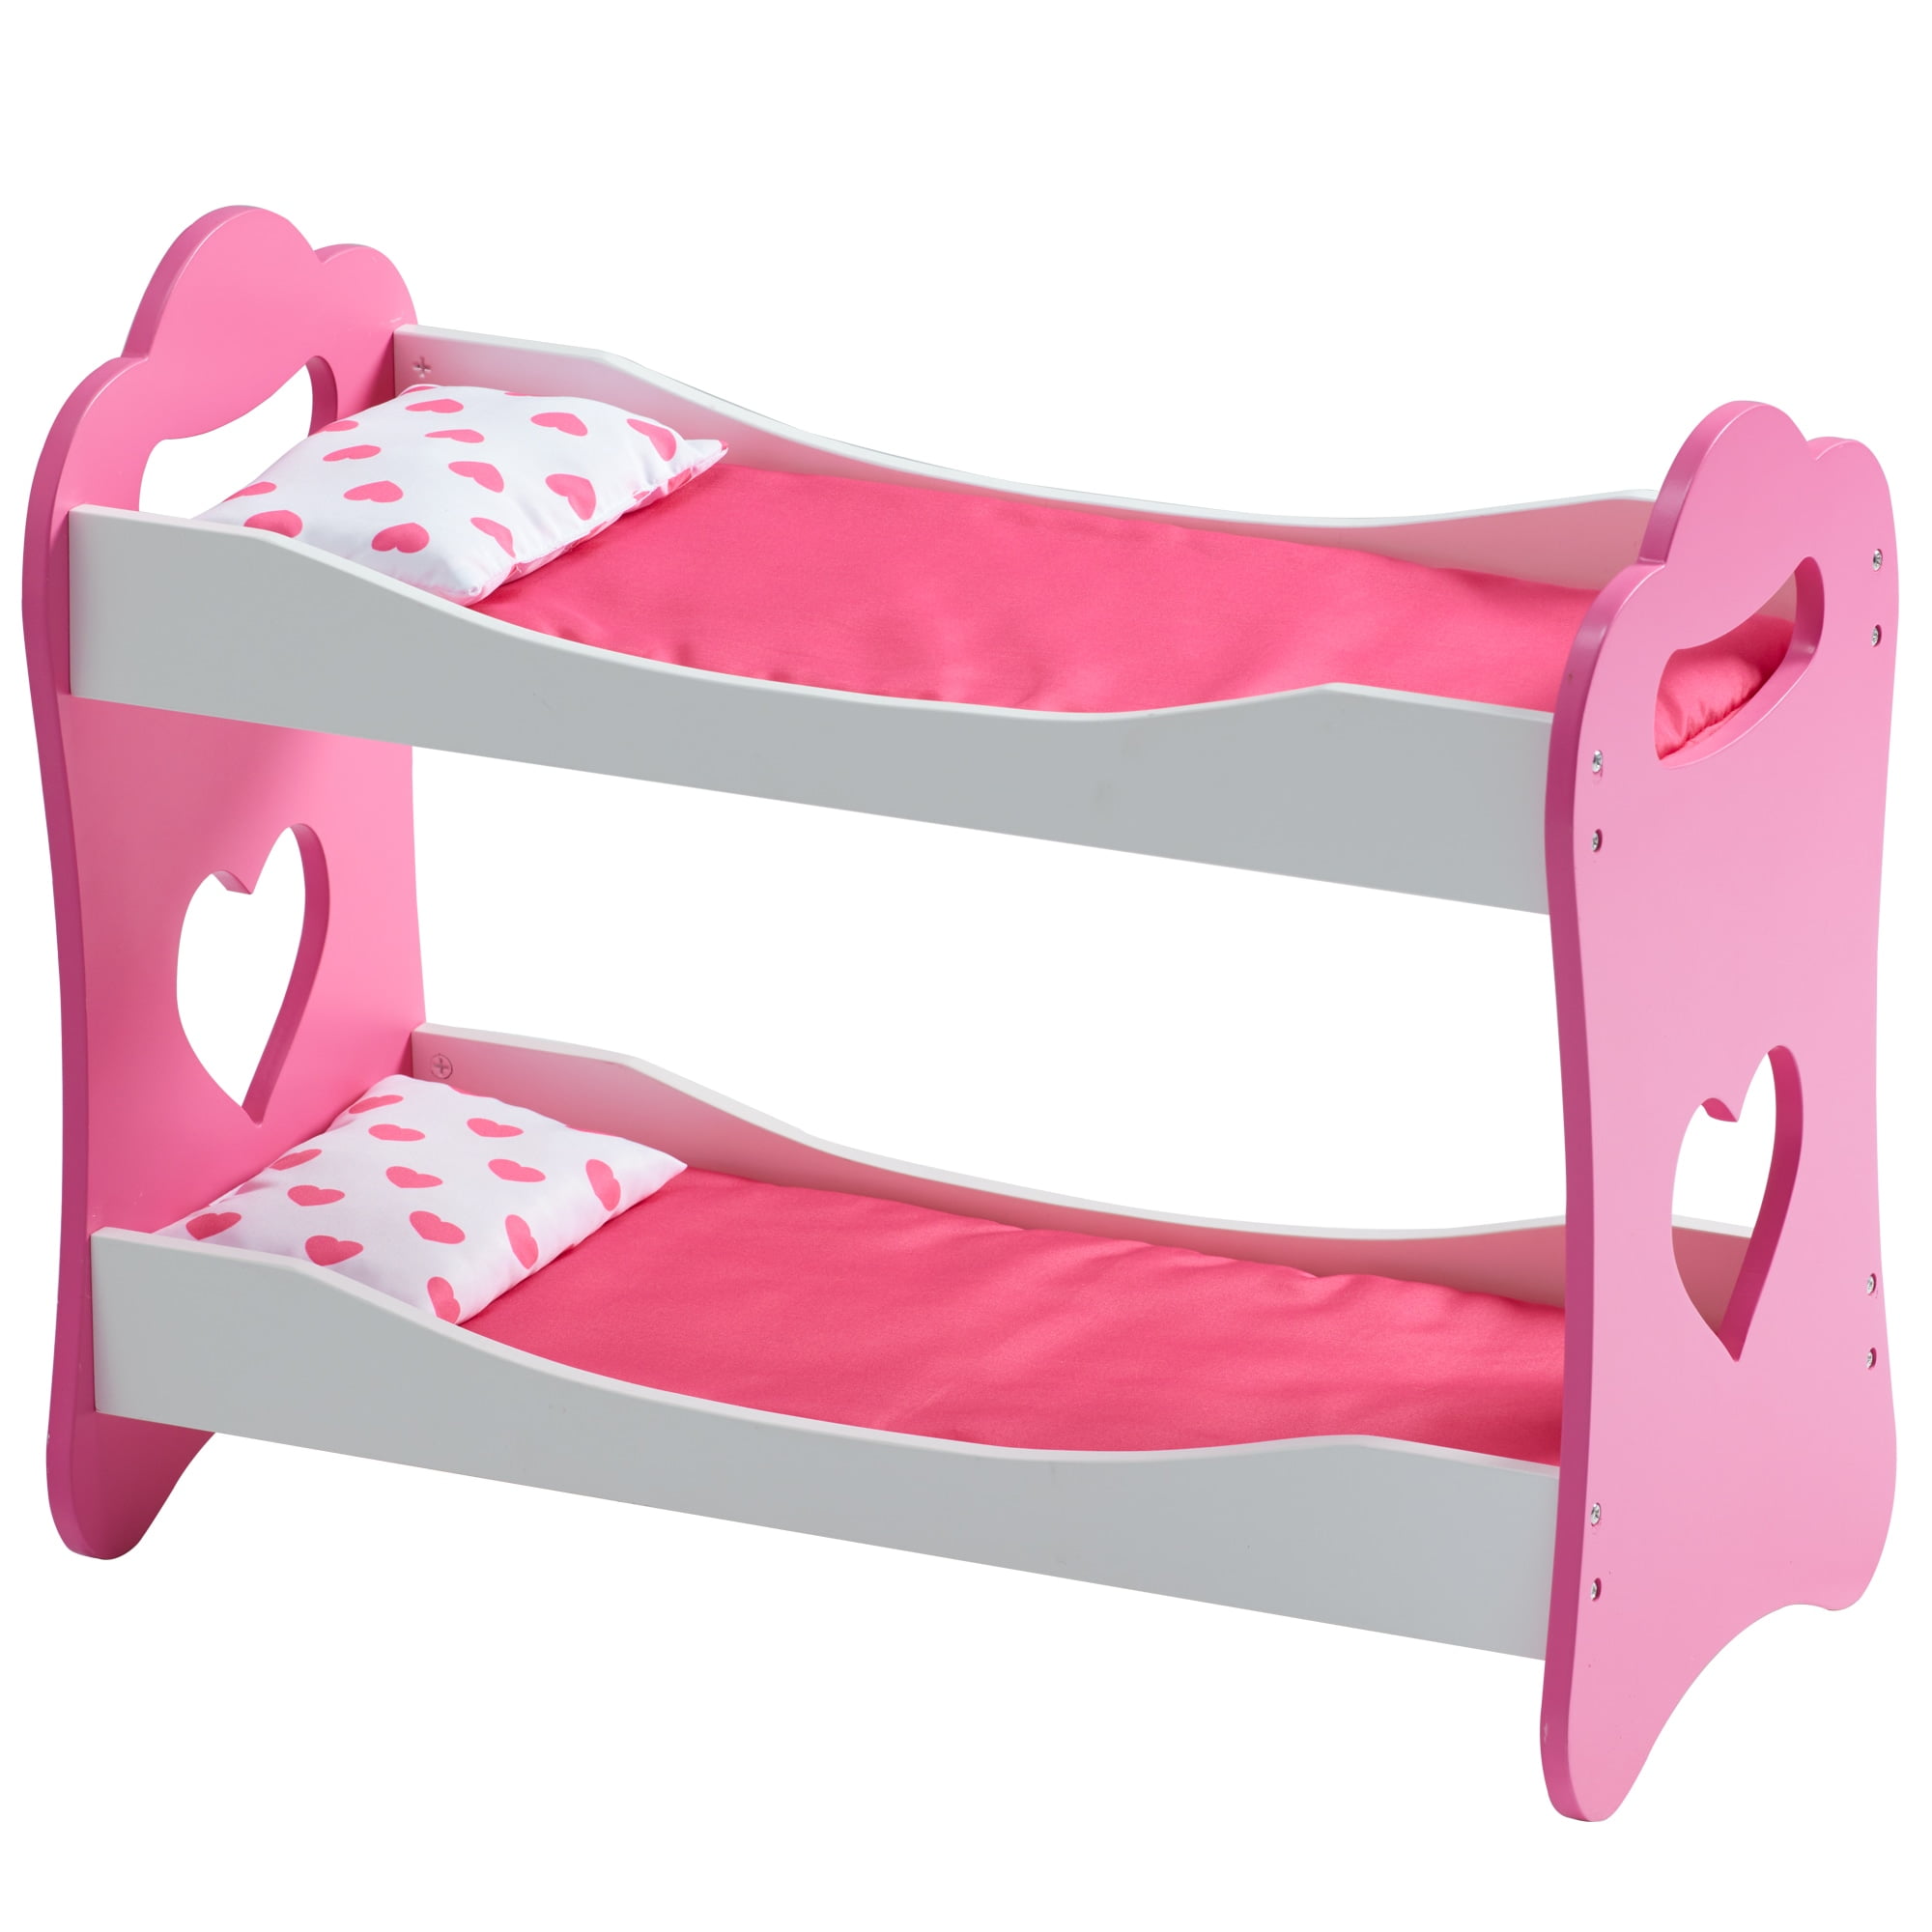 Olivia's little world - little princess 18 doll double bunk bed - Conforama